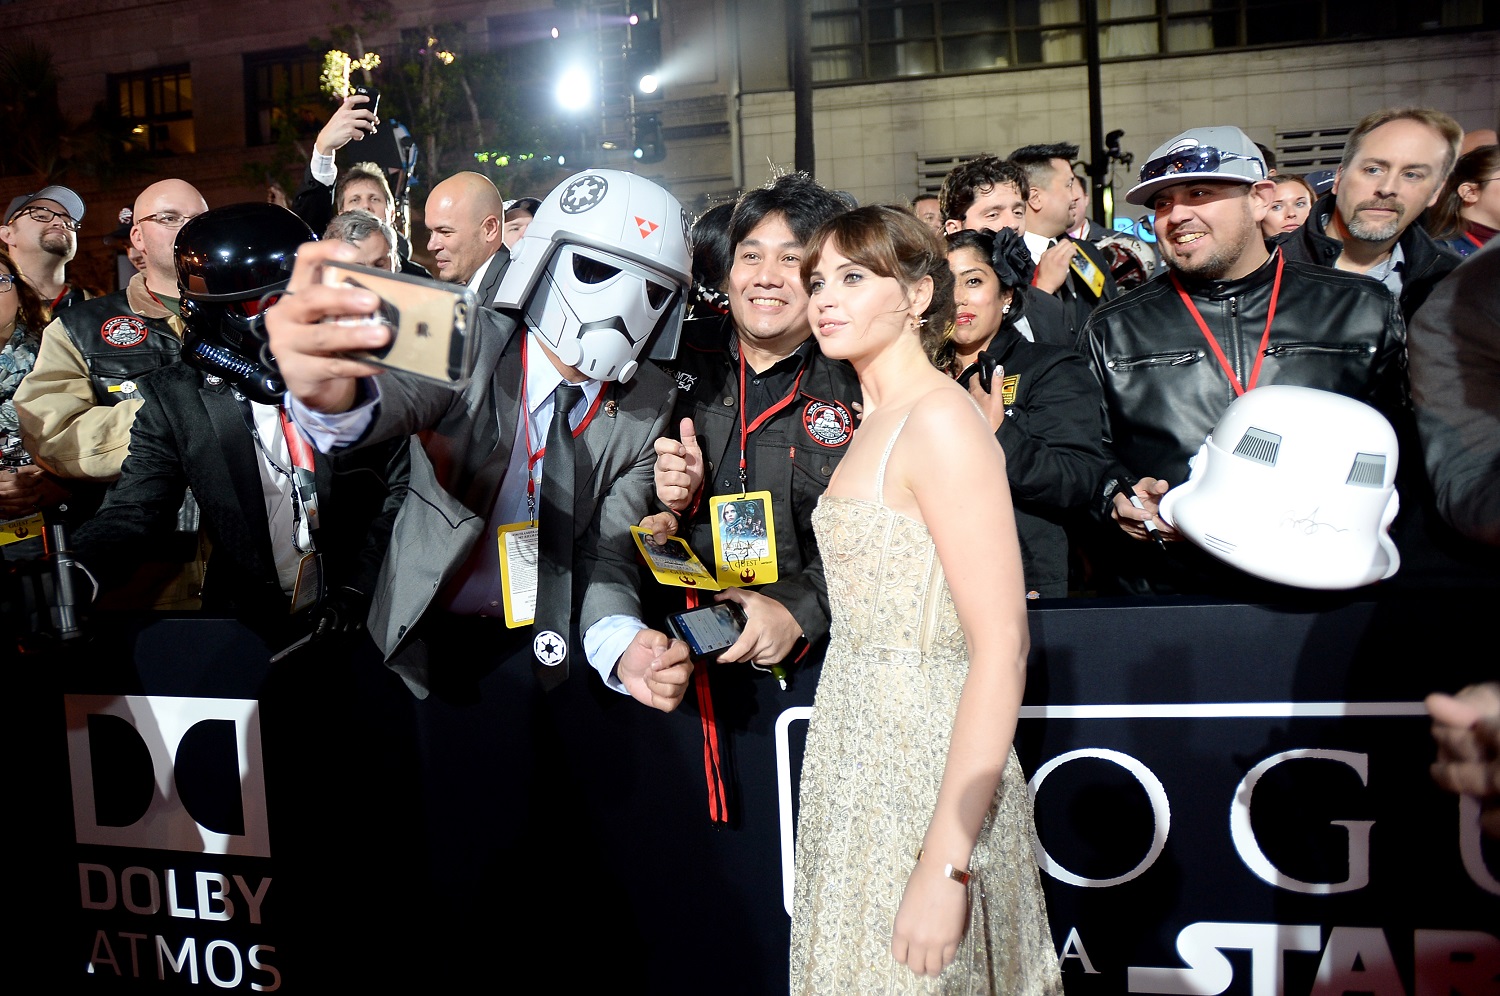 Rogue One Star Wars story premiere photos